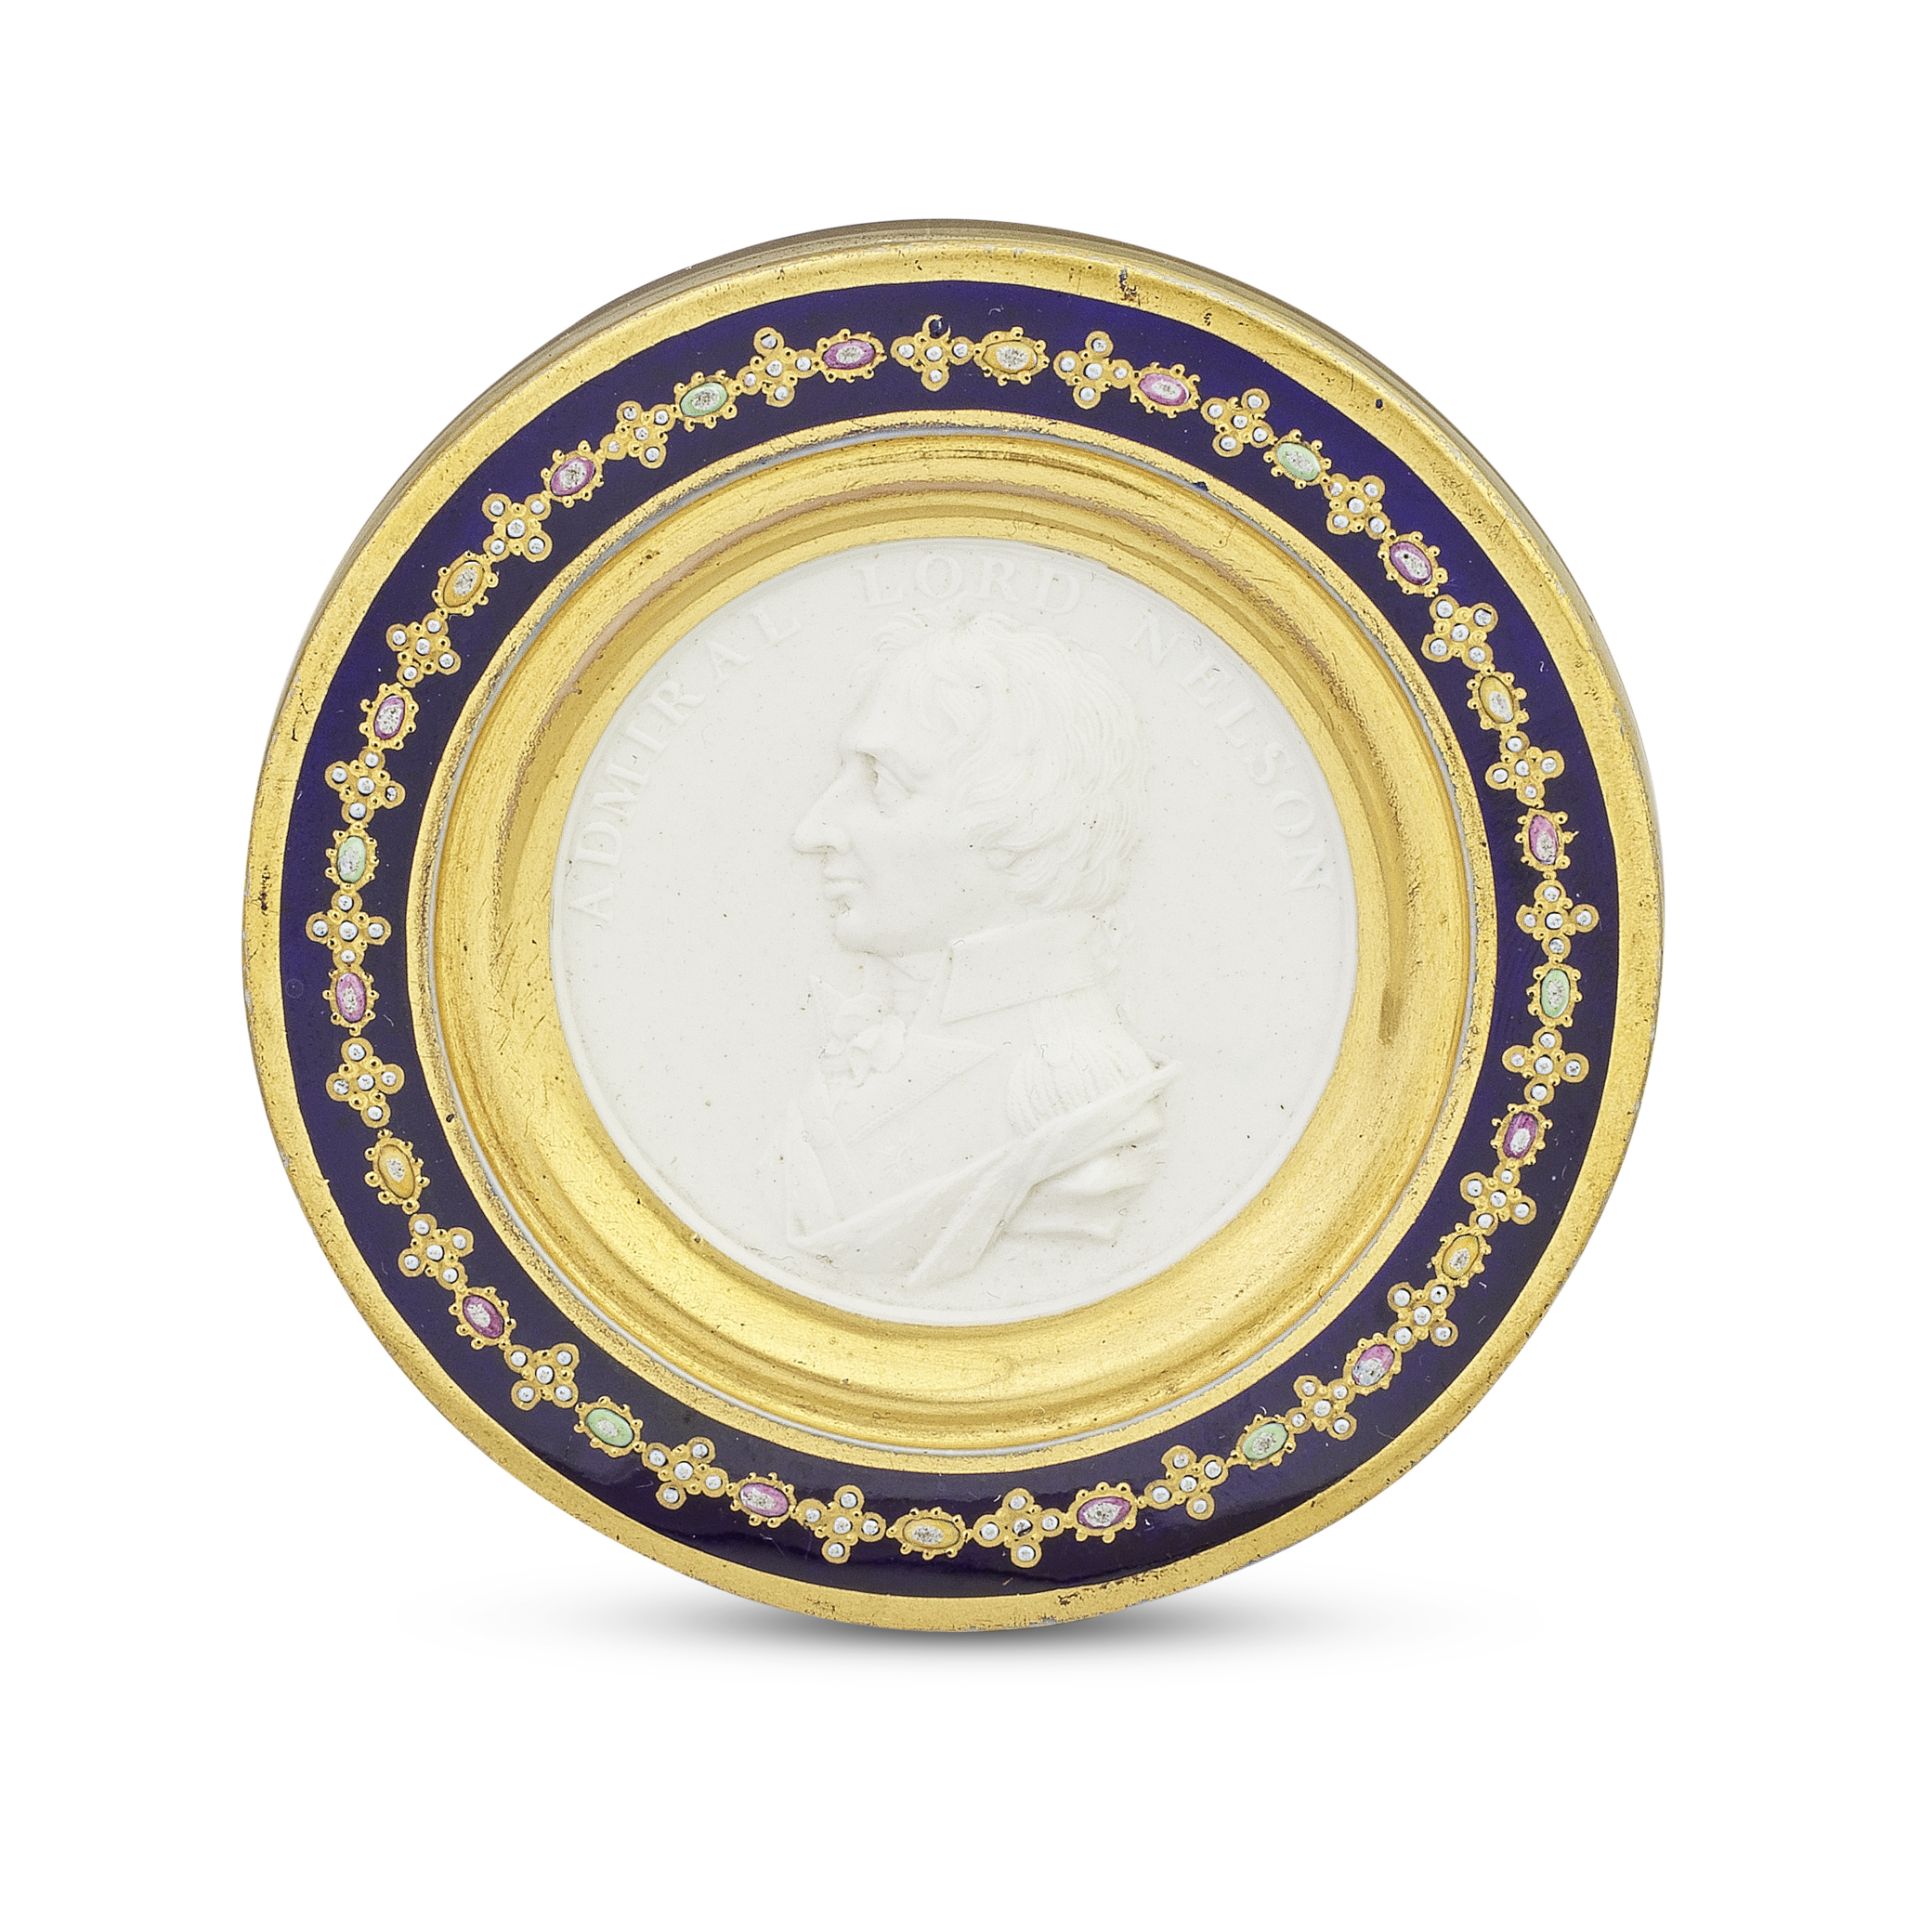 A fine Flight, Barr and Barr portrait medallion of Nelson by Thomas Baxter, circa 1815